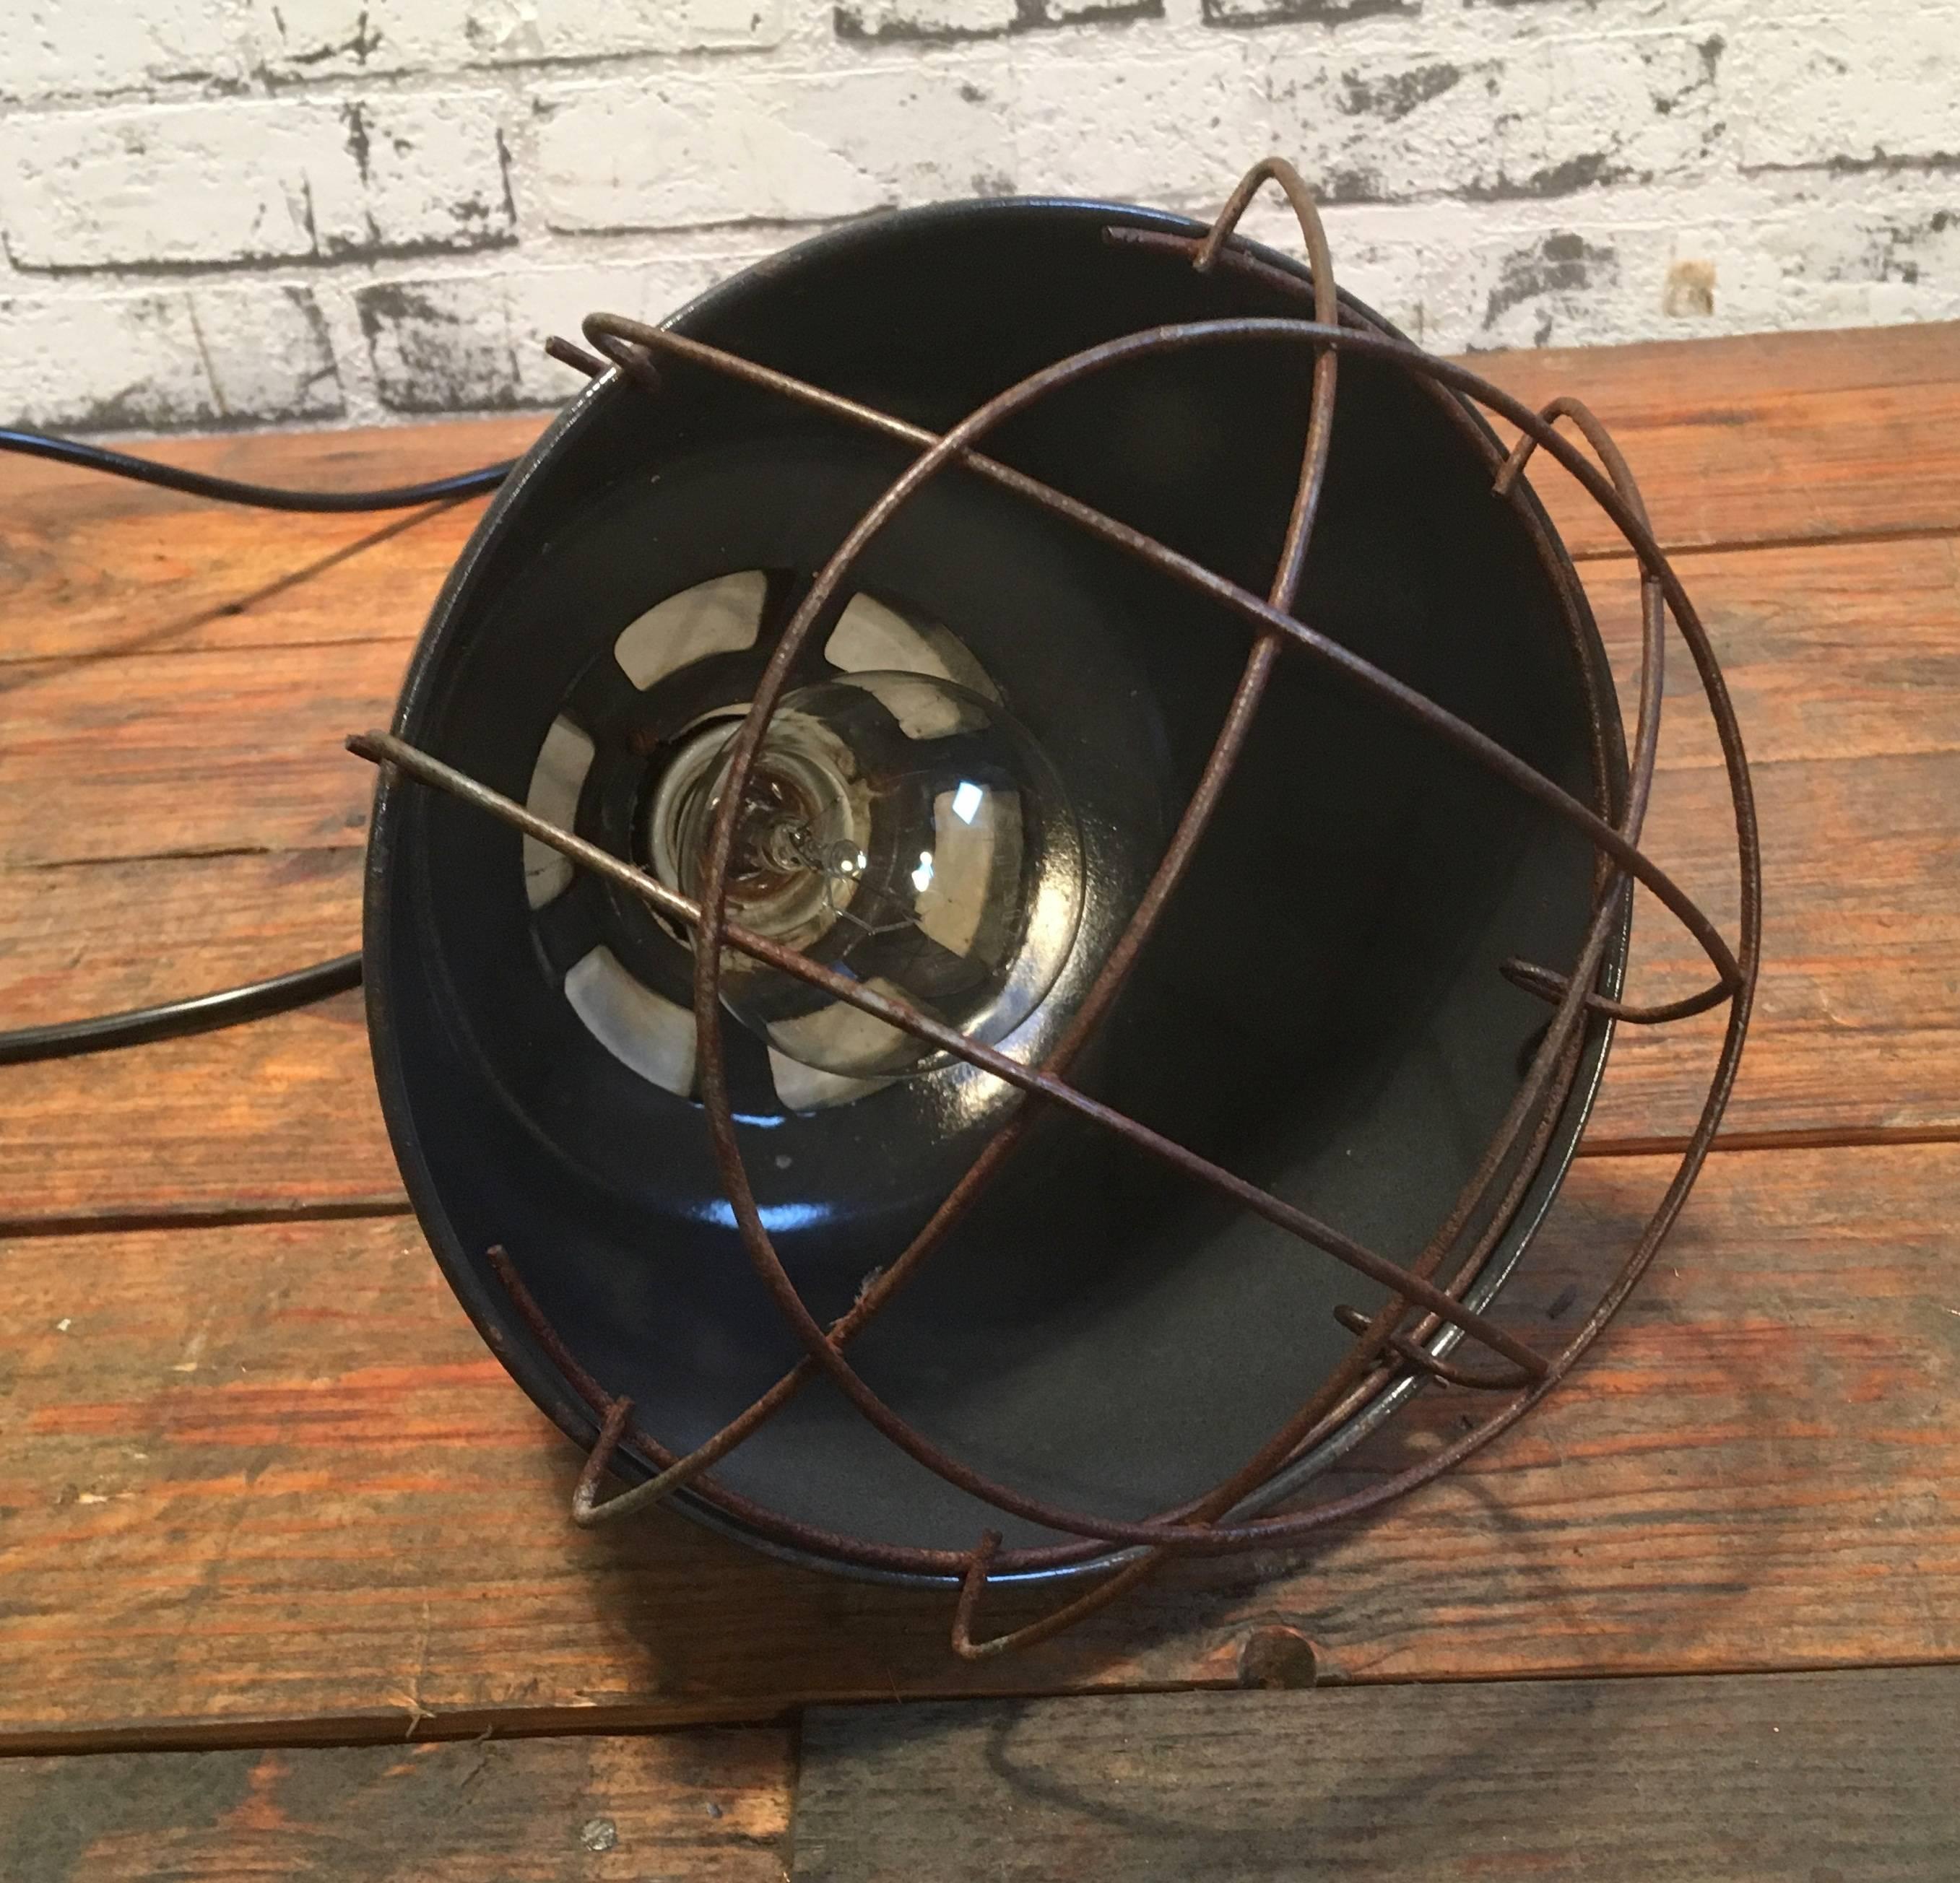 East German barn lamp, used mainly to warm up new born animals on the farm. 
Lamp has grey enemal metal body and bakelite dome. Iron cage. 
Porcelain socket for E27 bulbs. Newly wired.